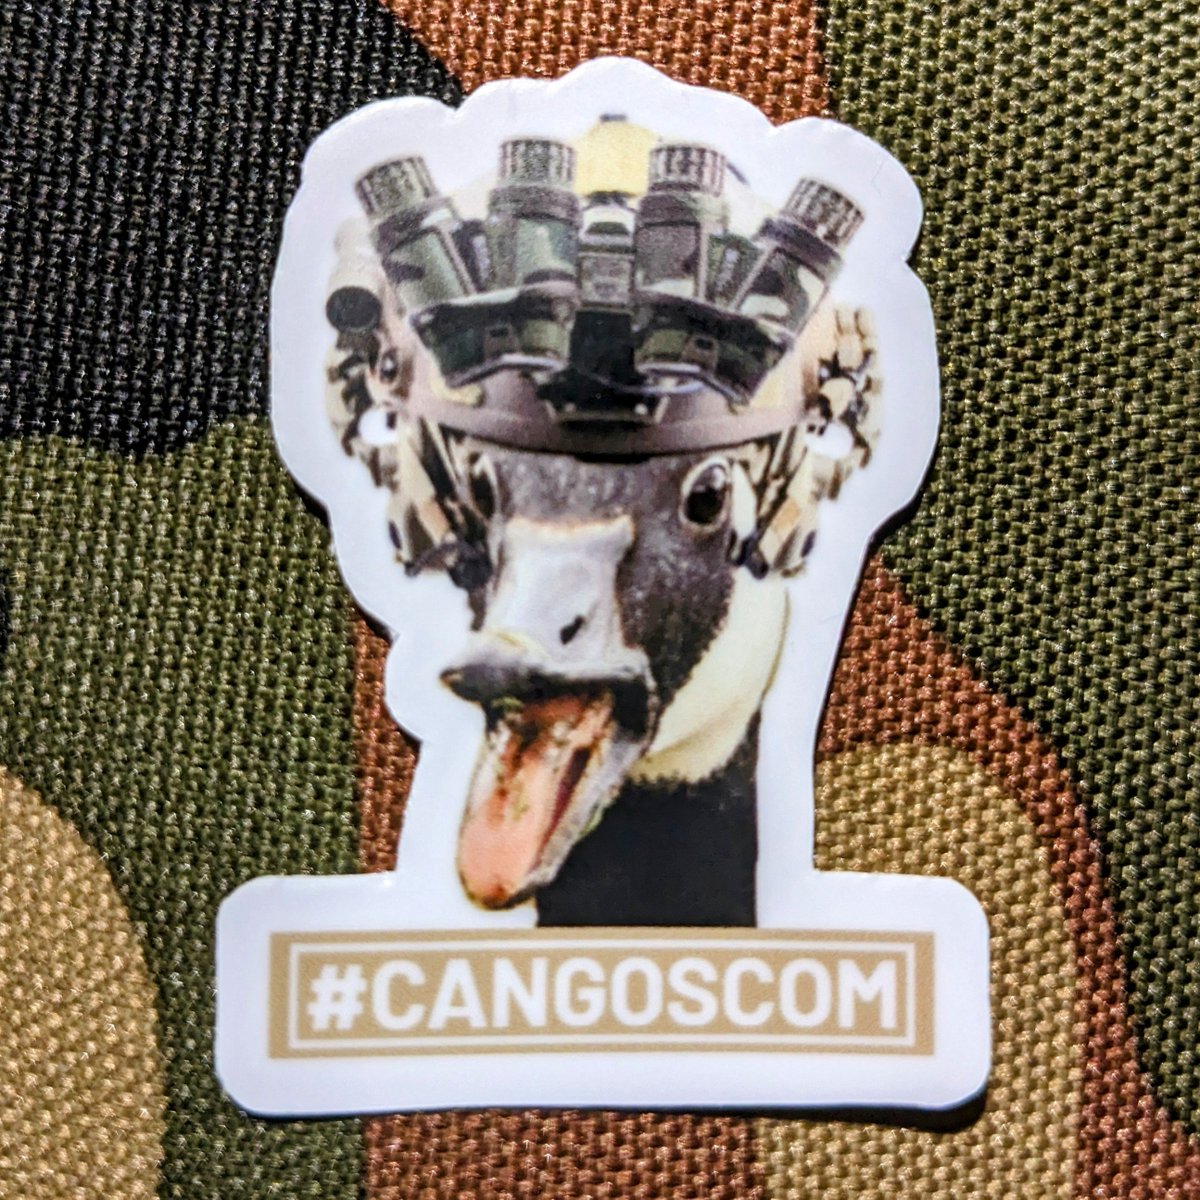 Excited to head to #CANSEC2023 this week to see how much swag I can get by introducing myself as the Chief of Capability Integration for #CANGOSCOM.